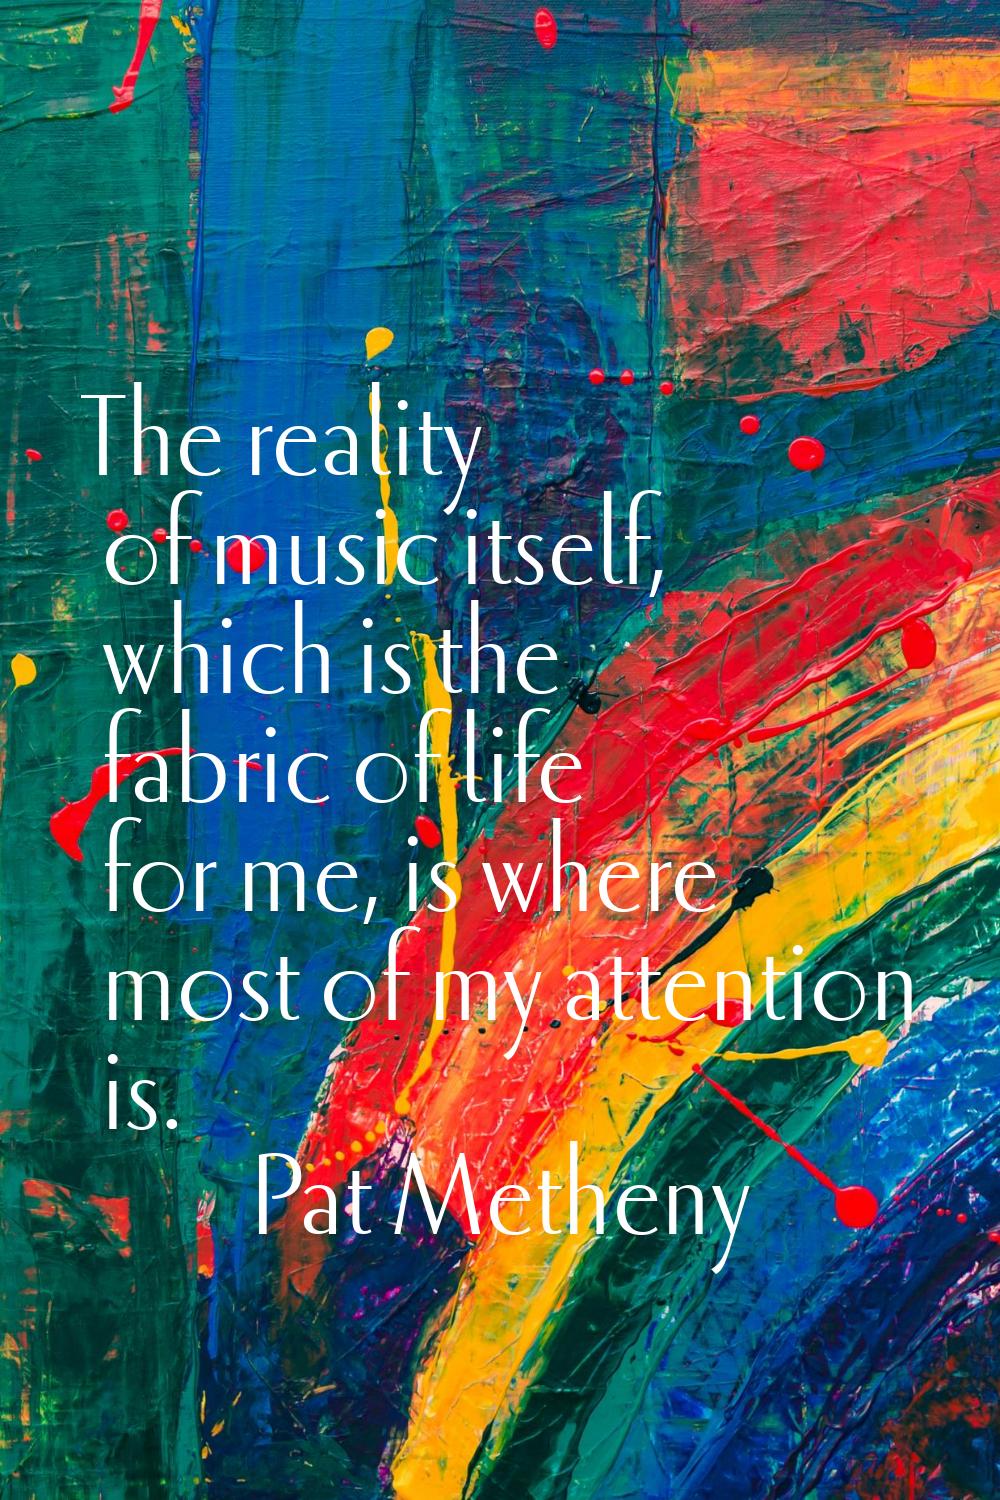 The reality of music itself, which is the fabric of life for me, is where most of my attention is.